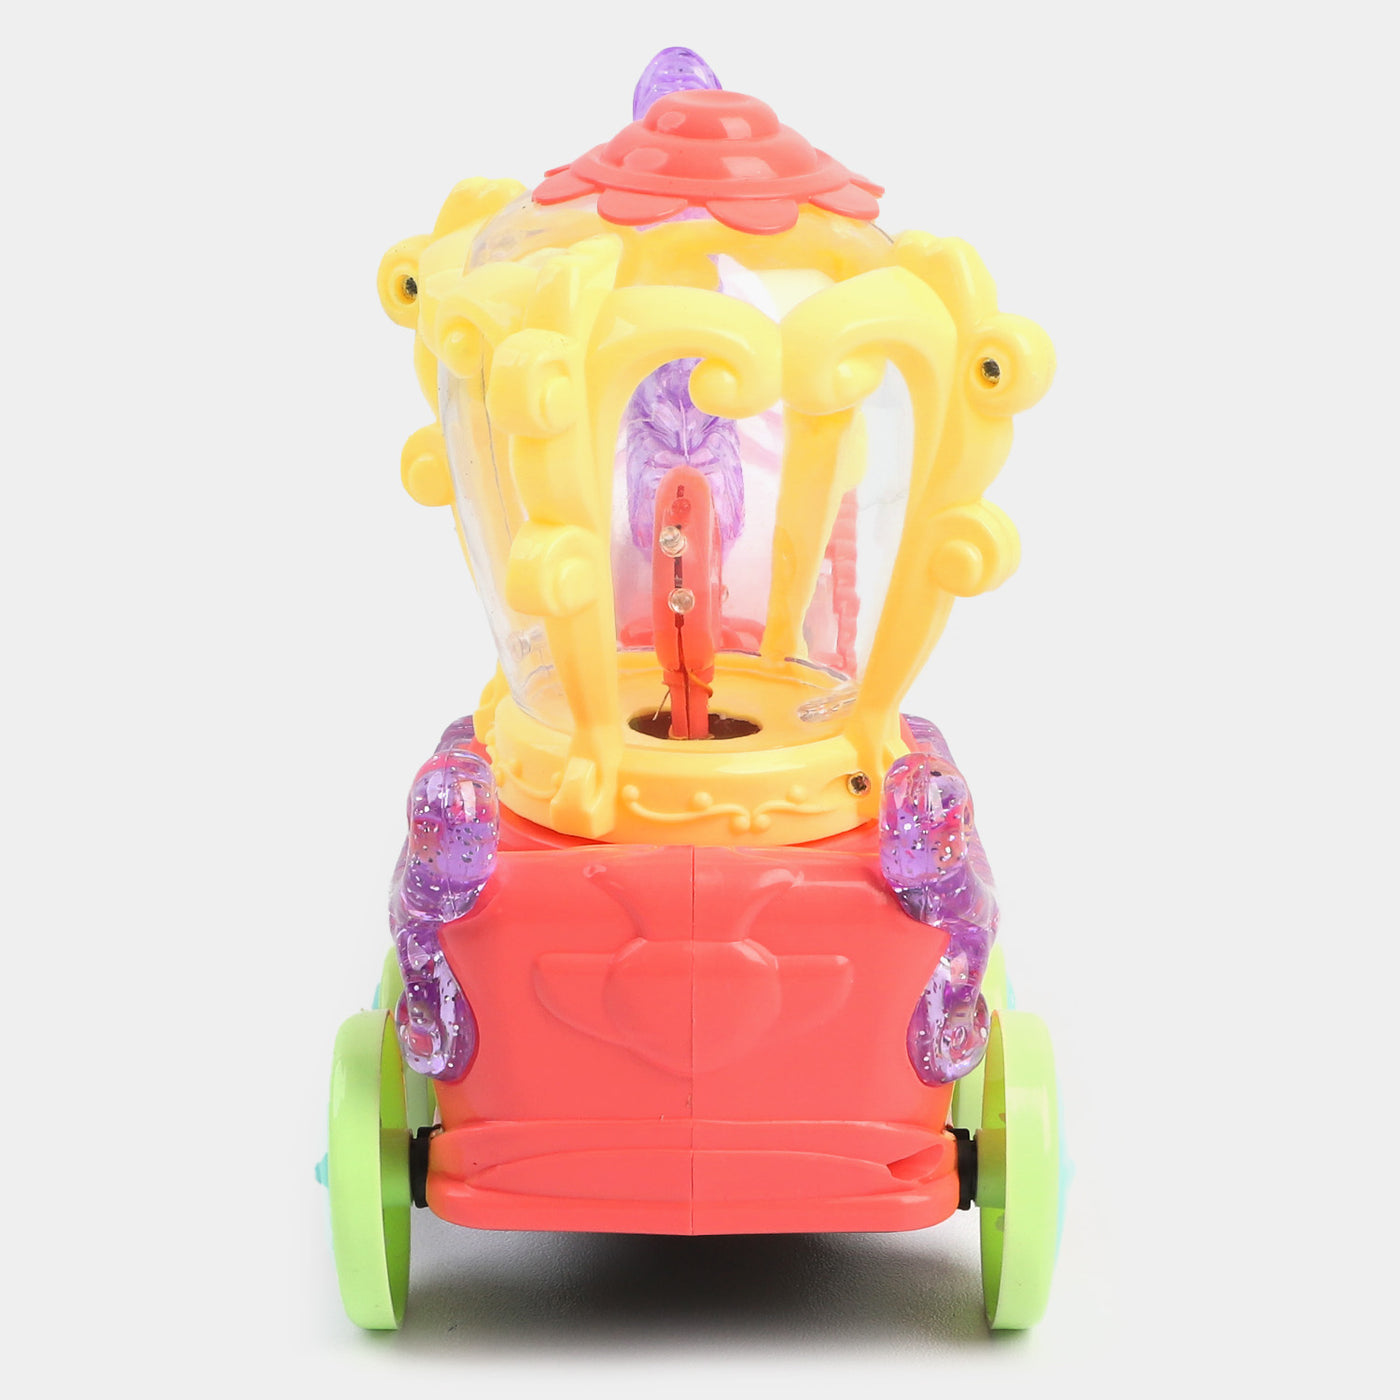 Fun Carriage With Light & Music Toy For Kids